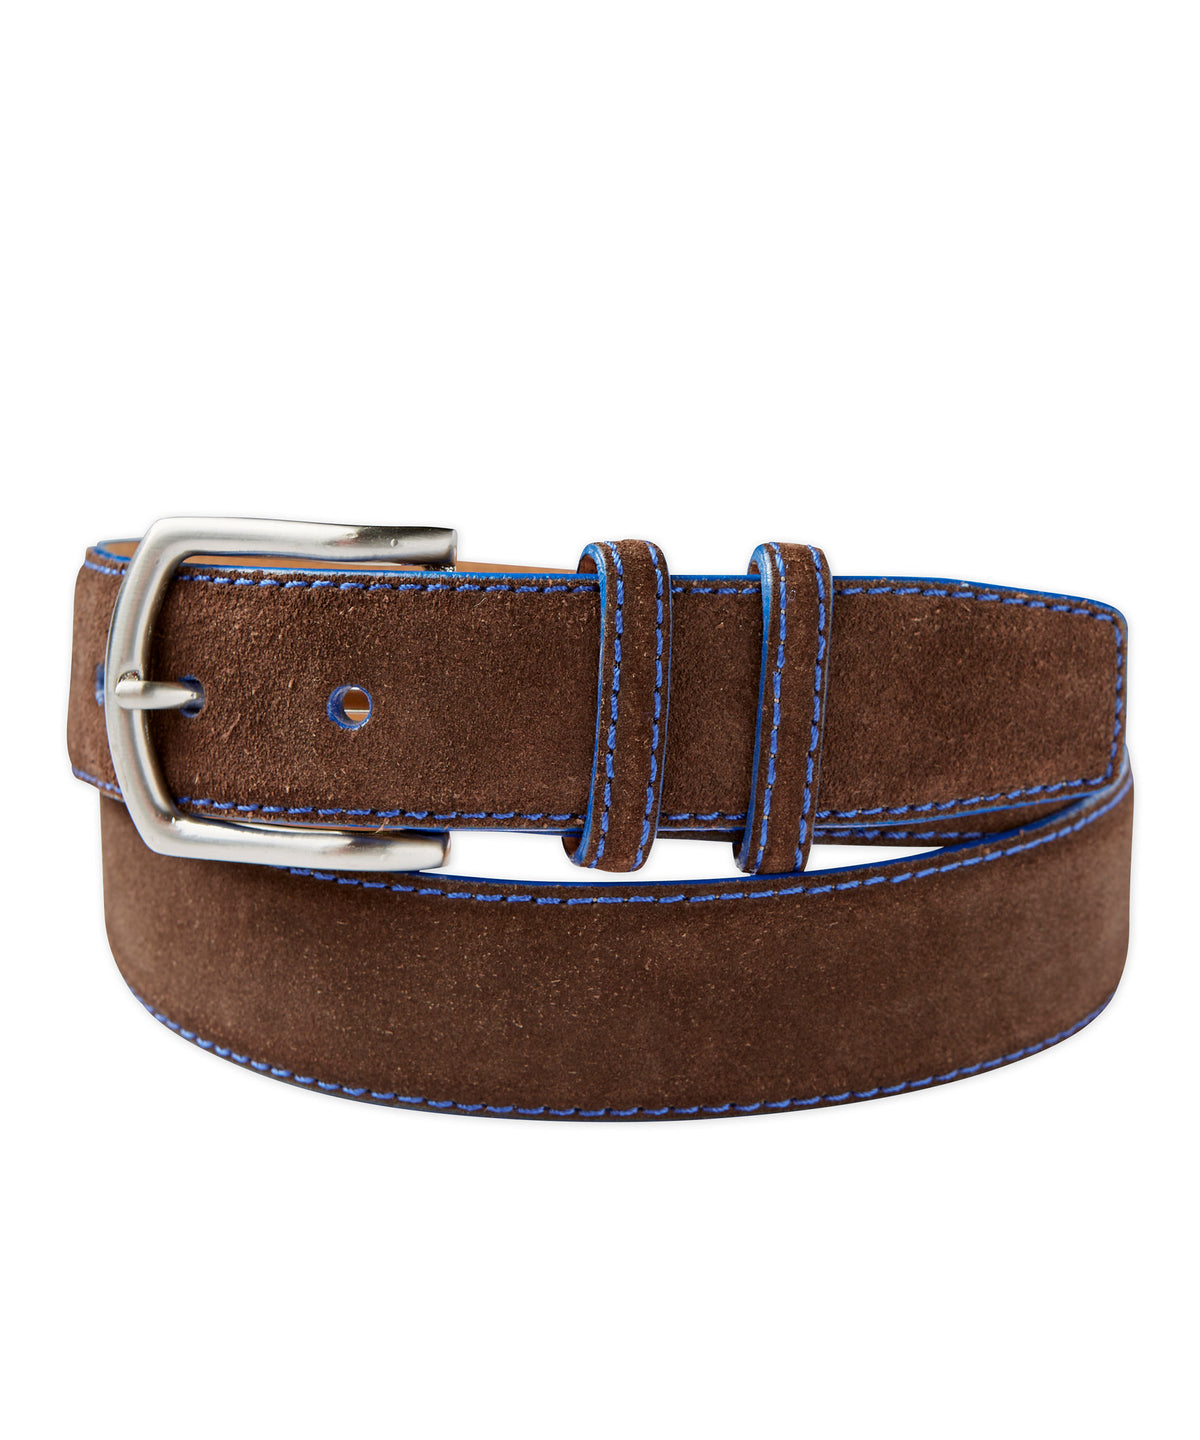 Suede Belt with Contrast Stitching